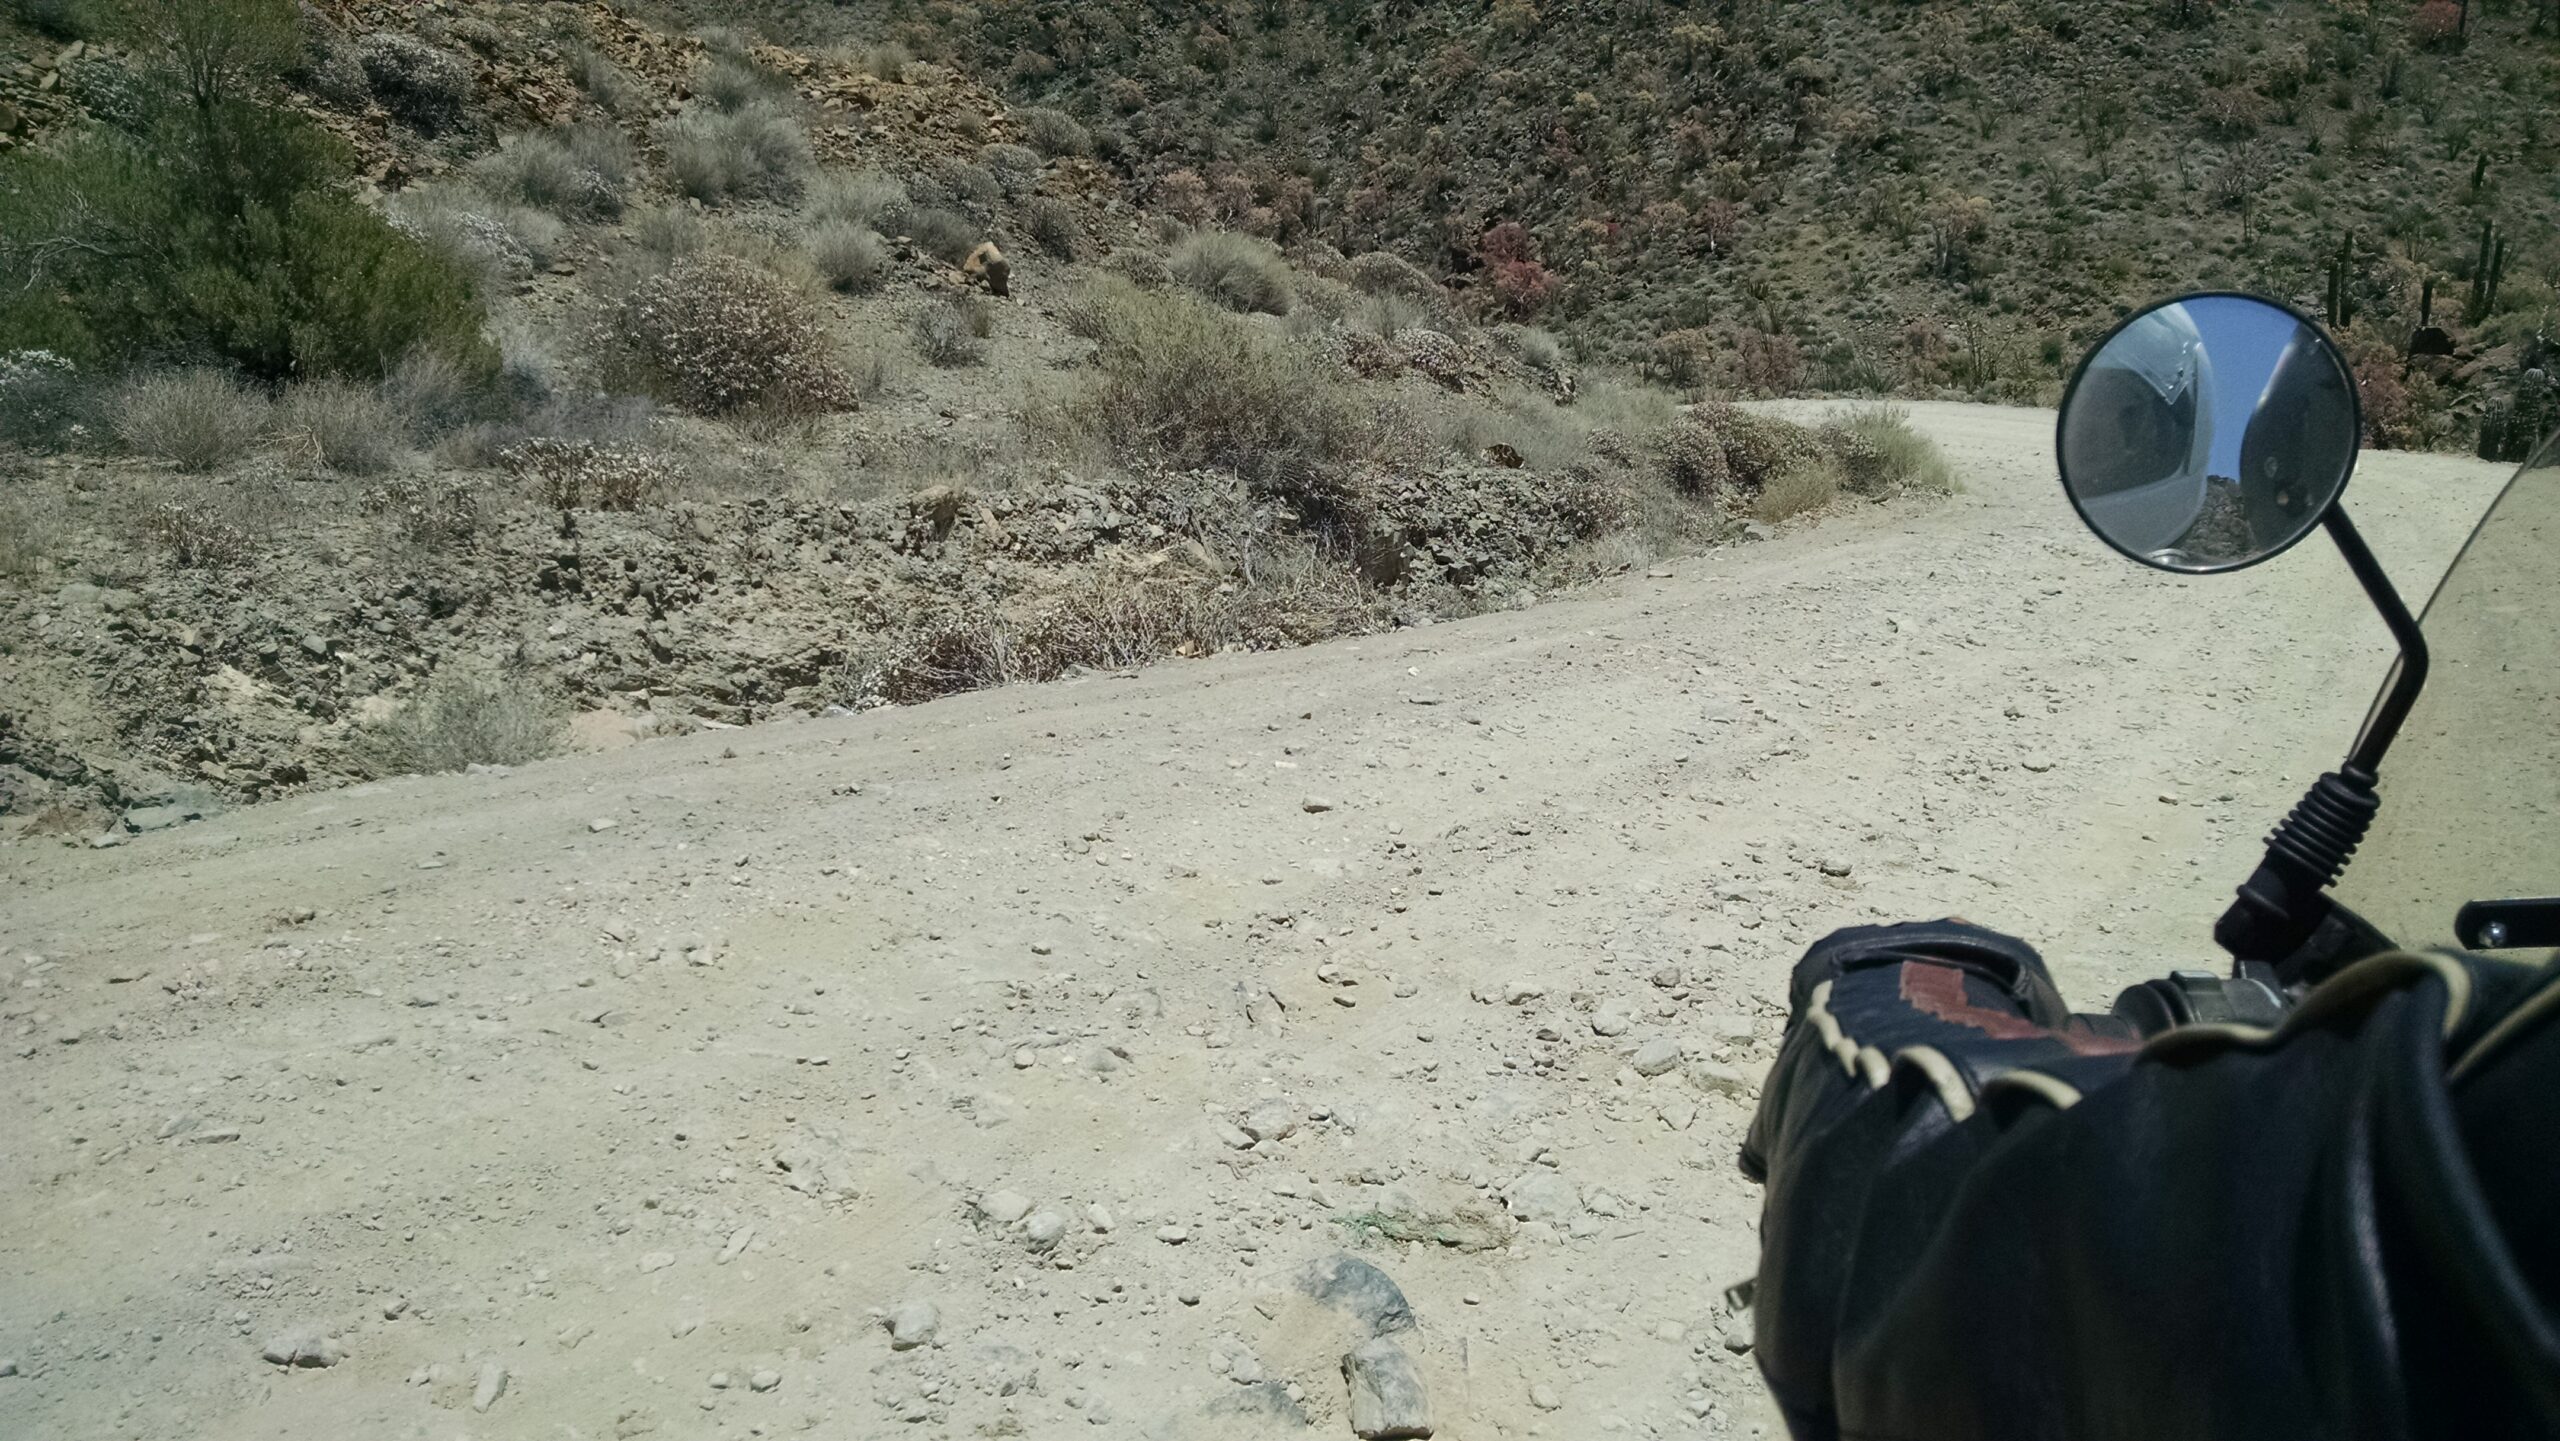 A view of a rocky road from the pillion seat of Skyler's motorcycle